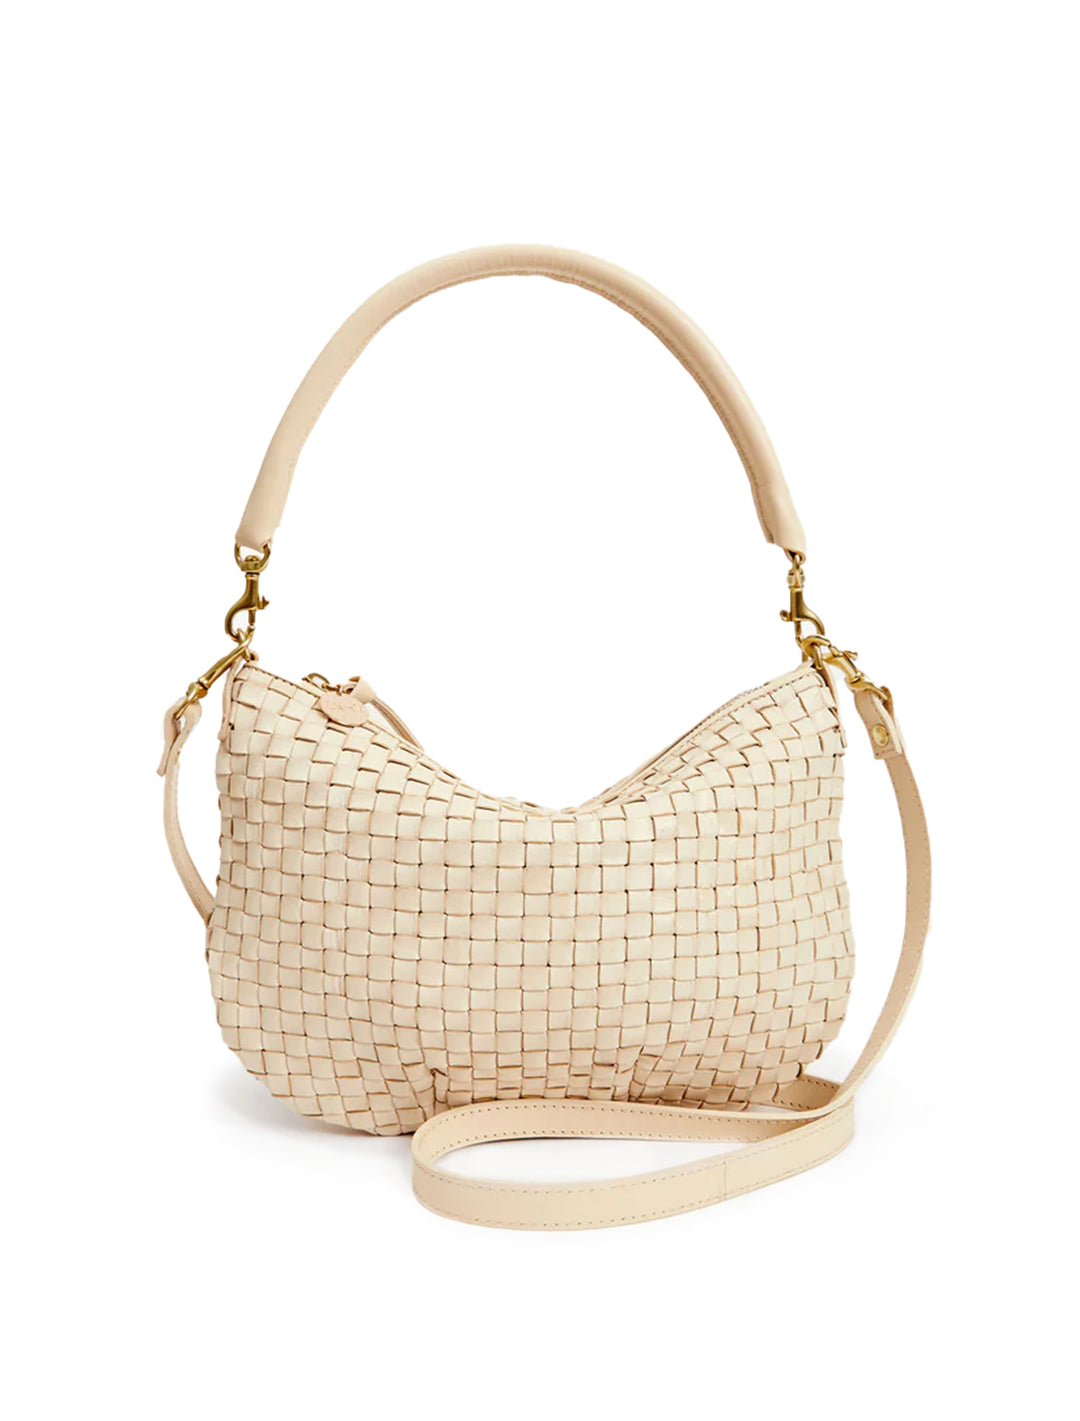 Front view of Clare V.'s petit moyen messenger in cream woven checker.